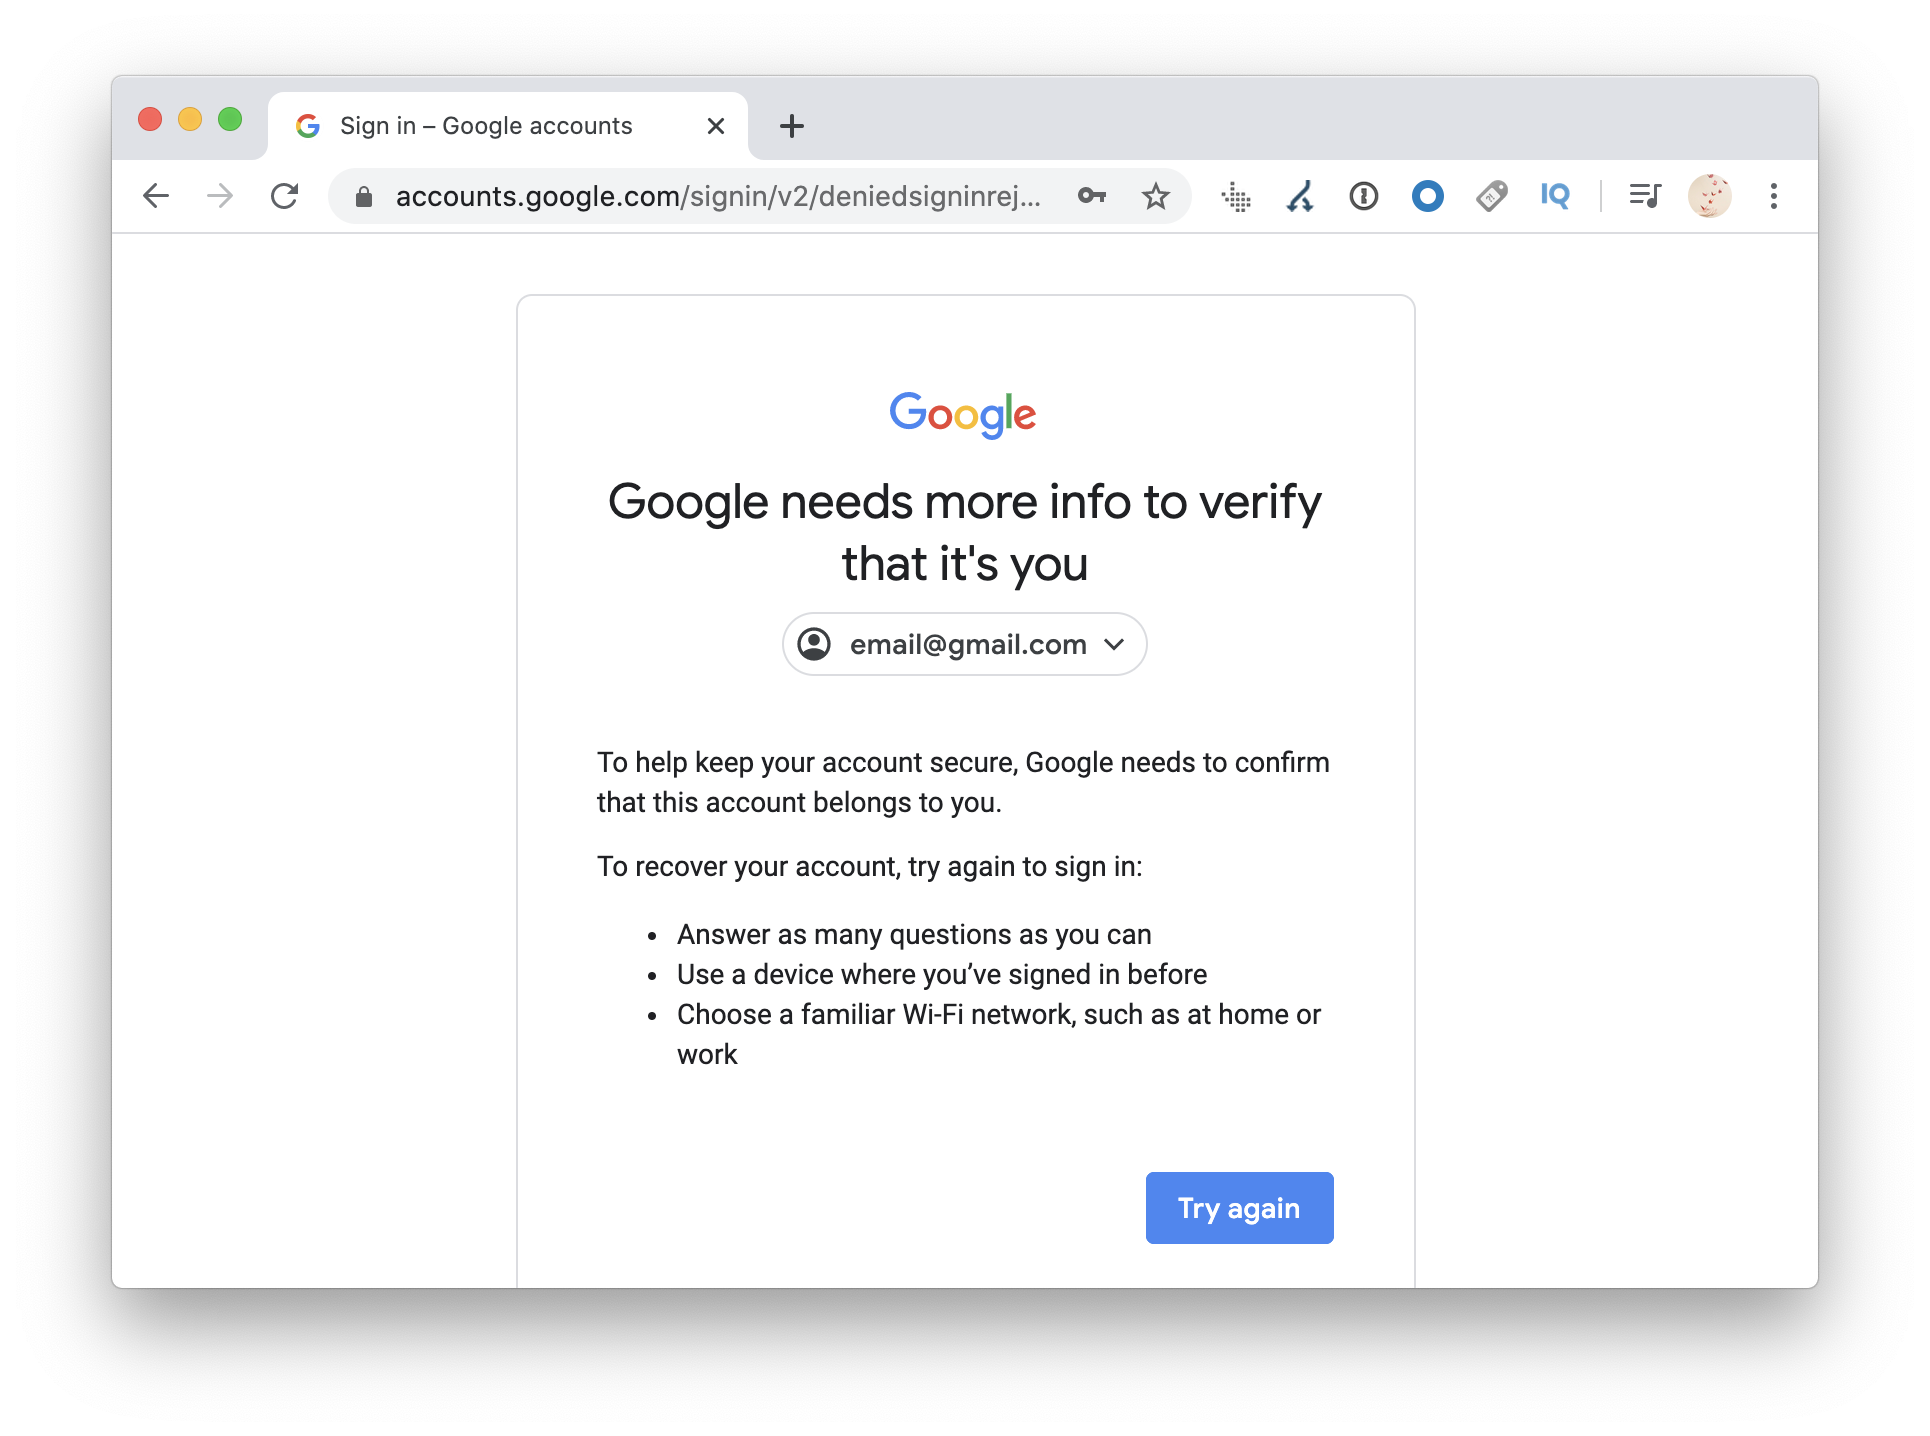 Google needs more info to verify that it's you